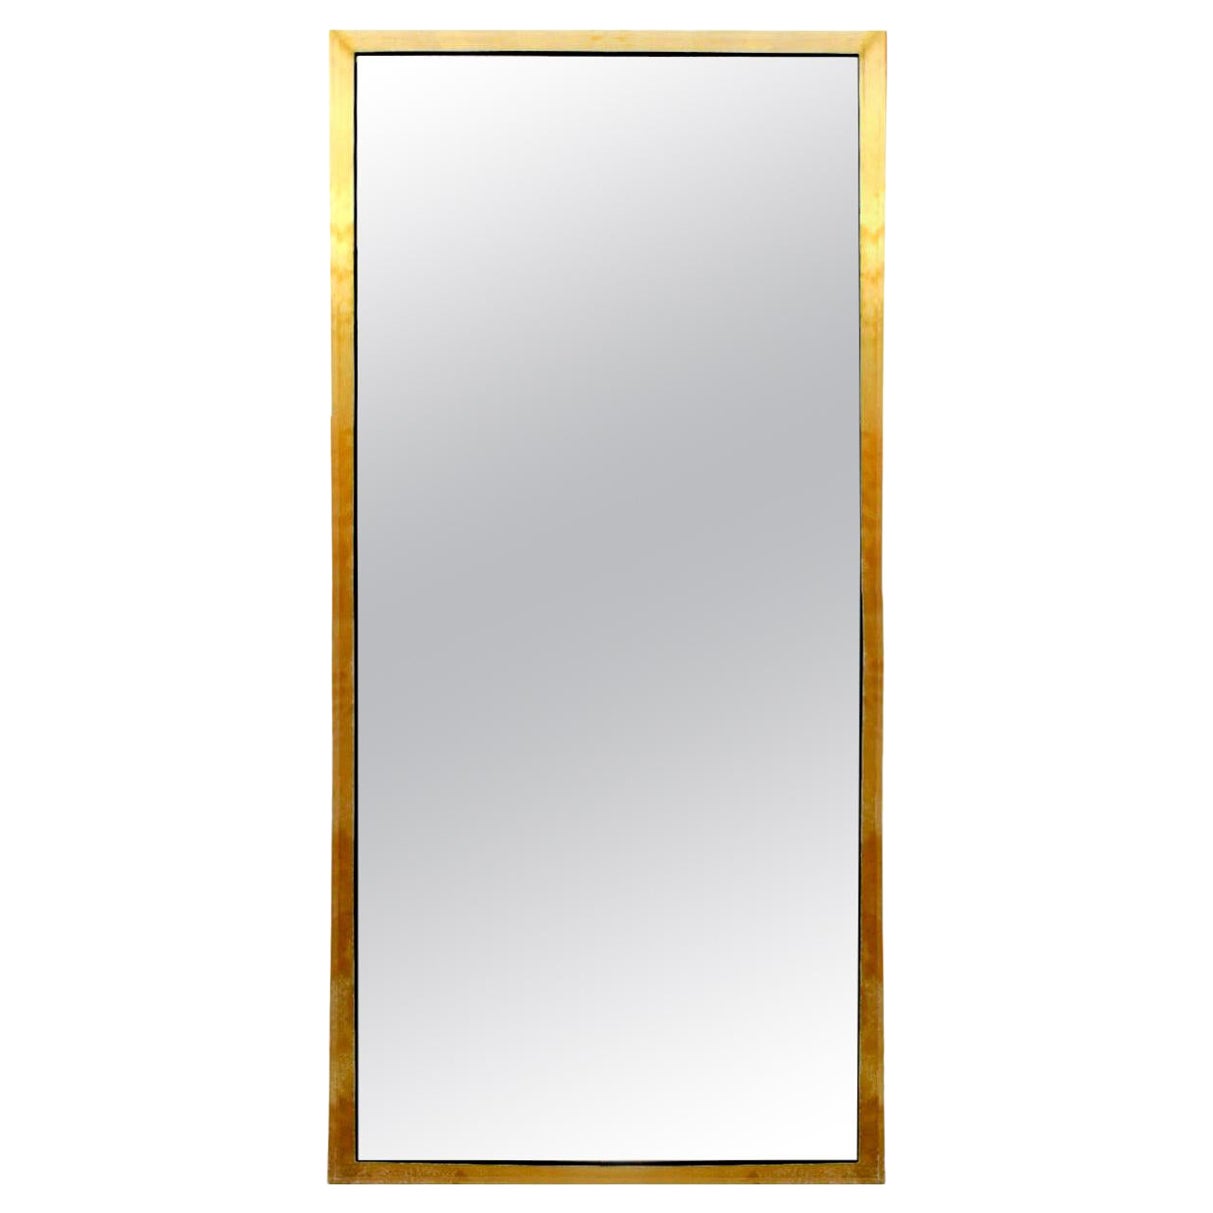 Vintage Model "Infinity" Large Made of Brass Italian Mirror, Ready For Sale